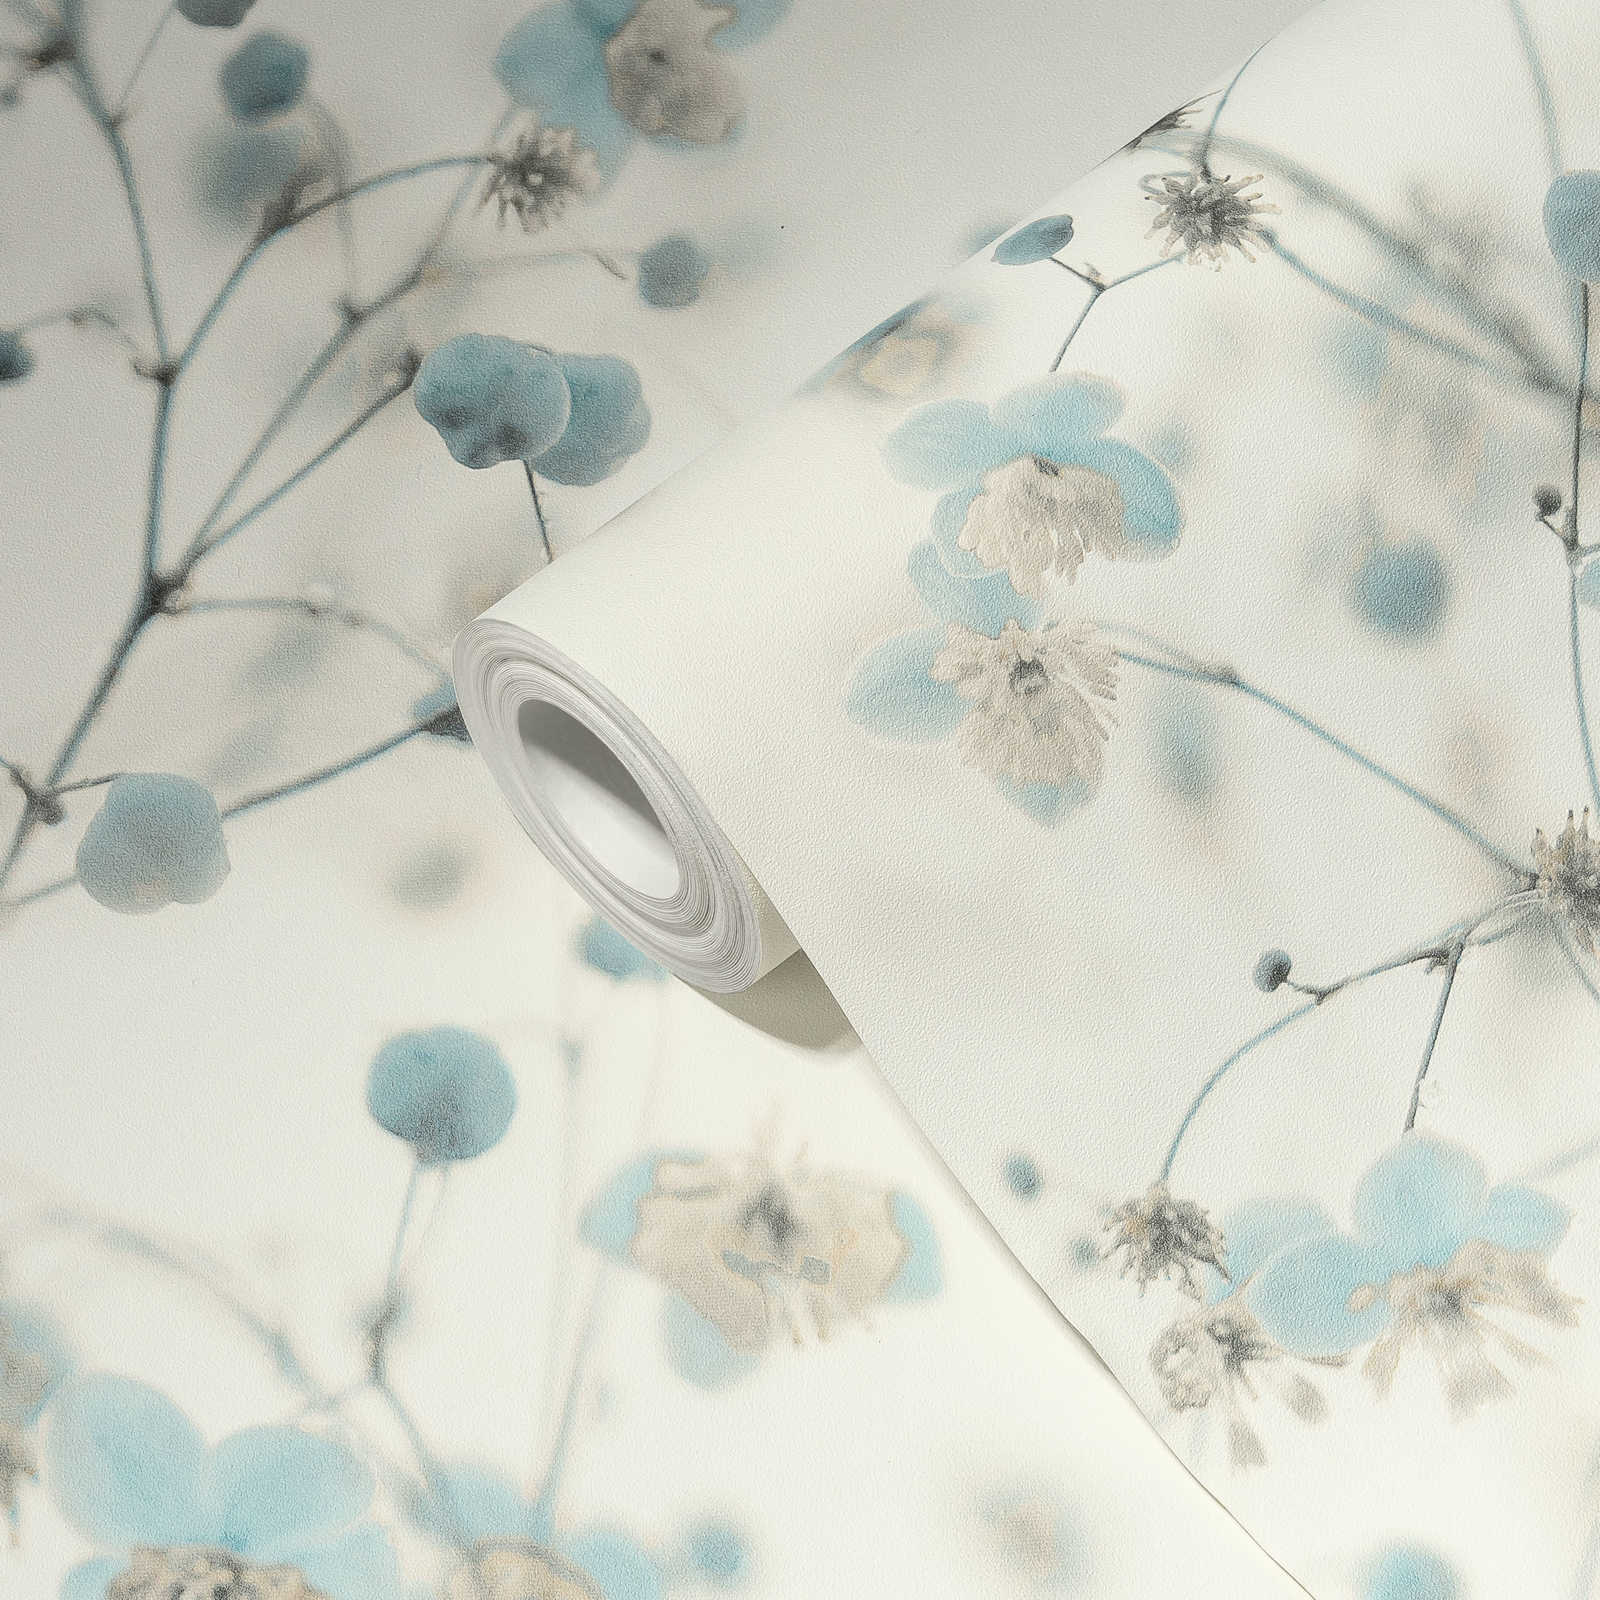             Romantic floral wallpaper photo collage style - grey, blue
        